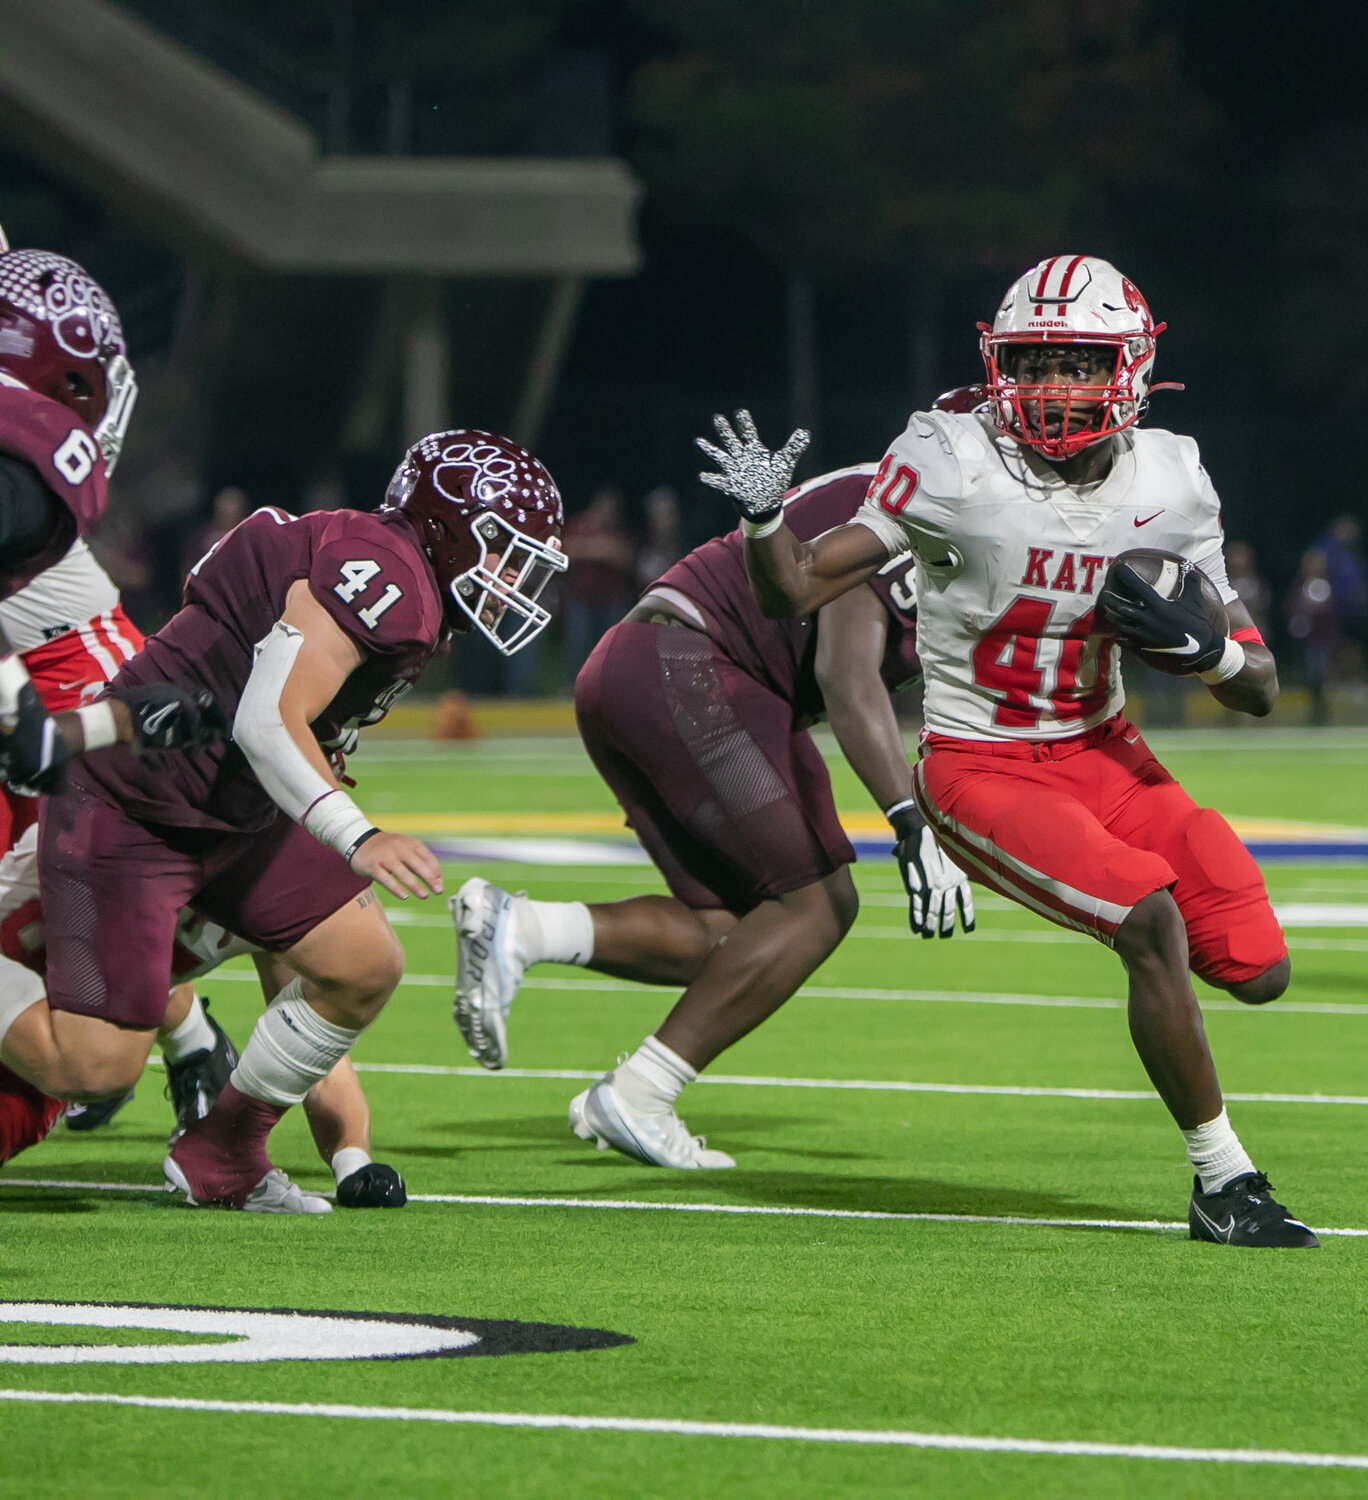 Tremayne Hill cuts upfield during Friday's area round game between Katy and Cy-Fair at the Berry Center in Cypress.